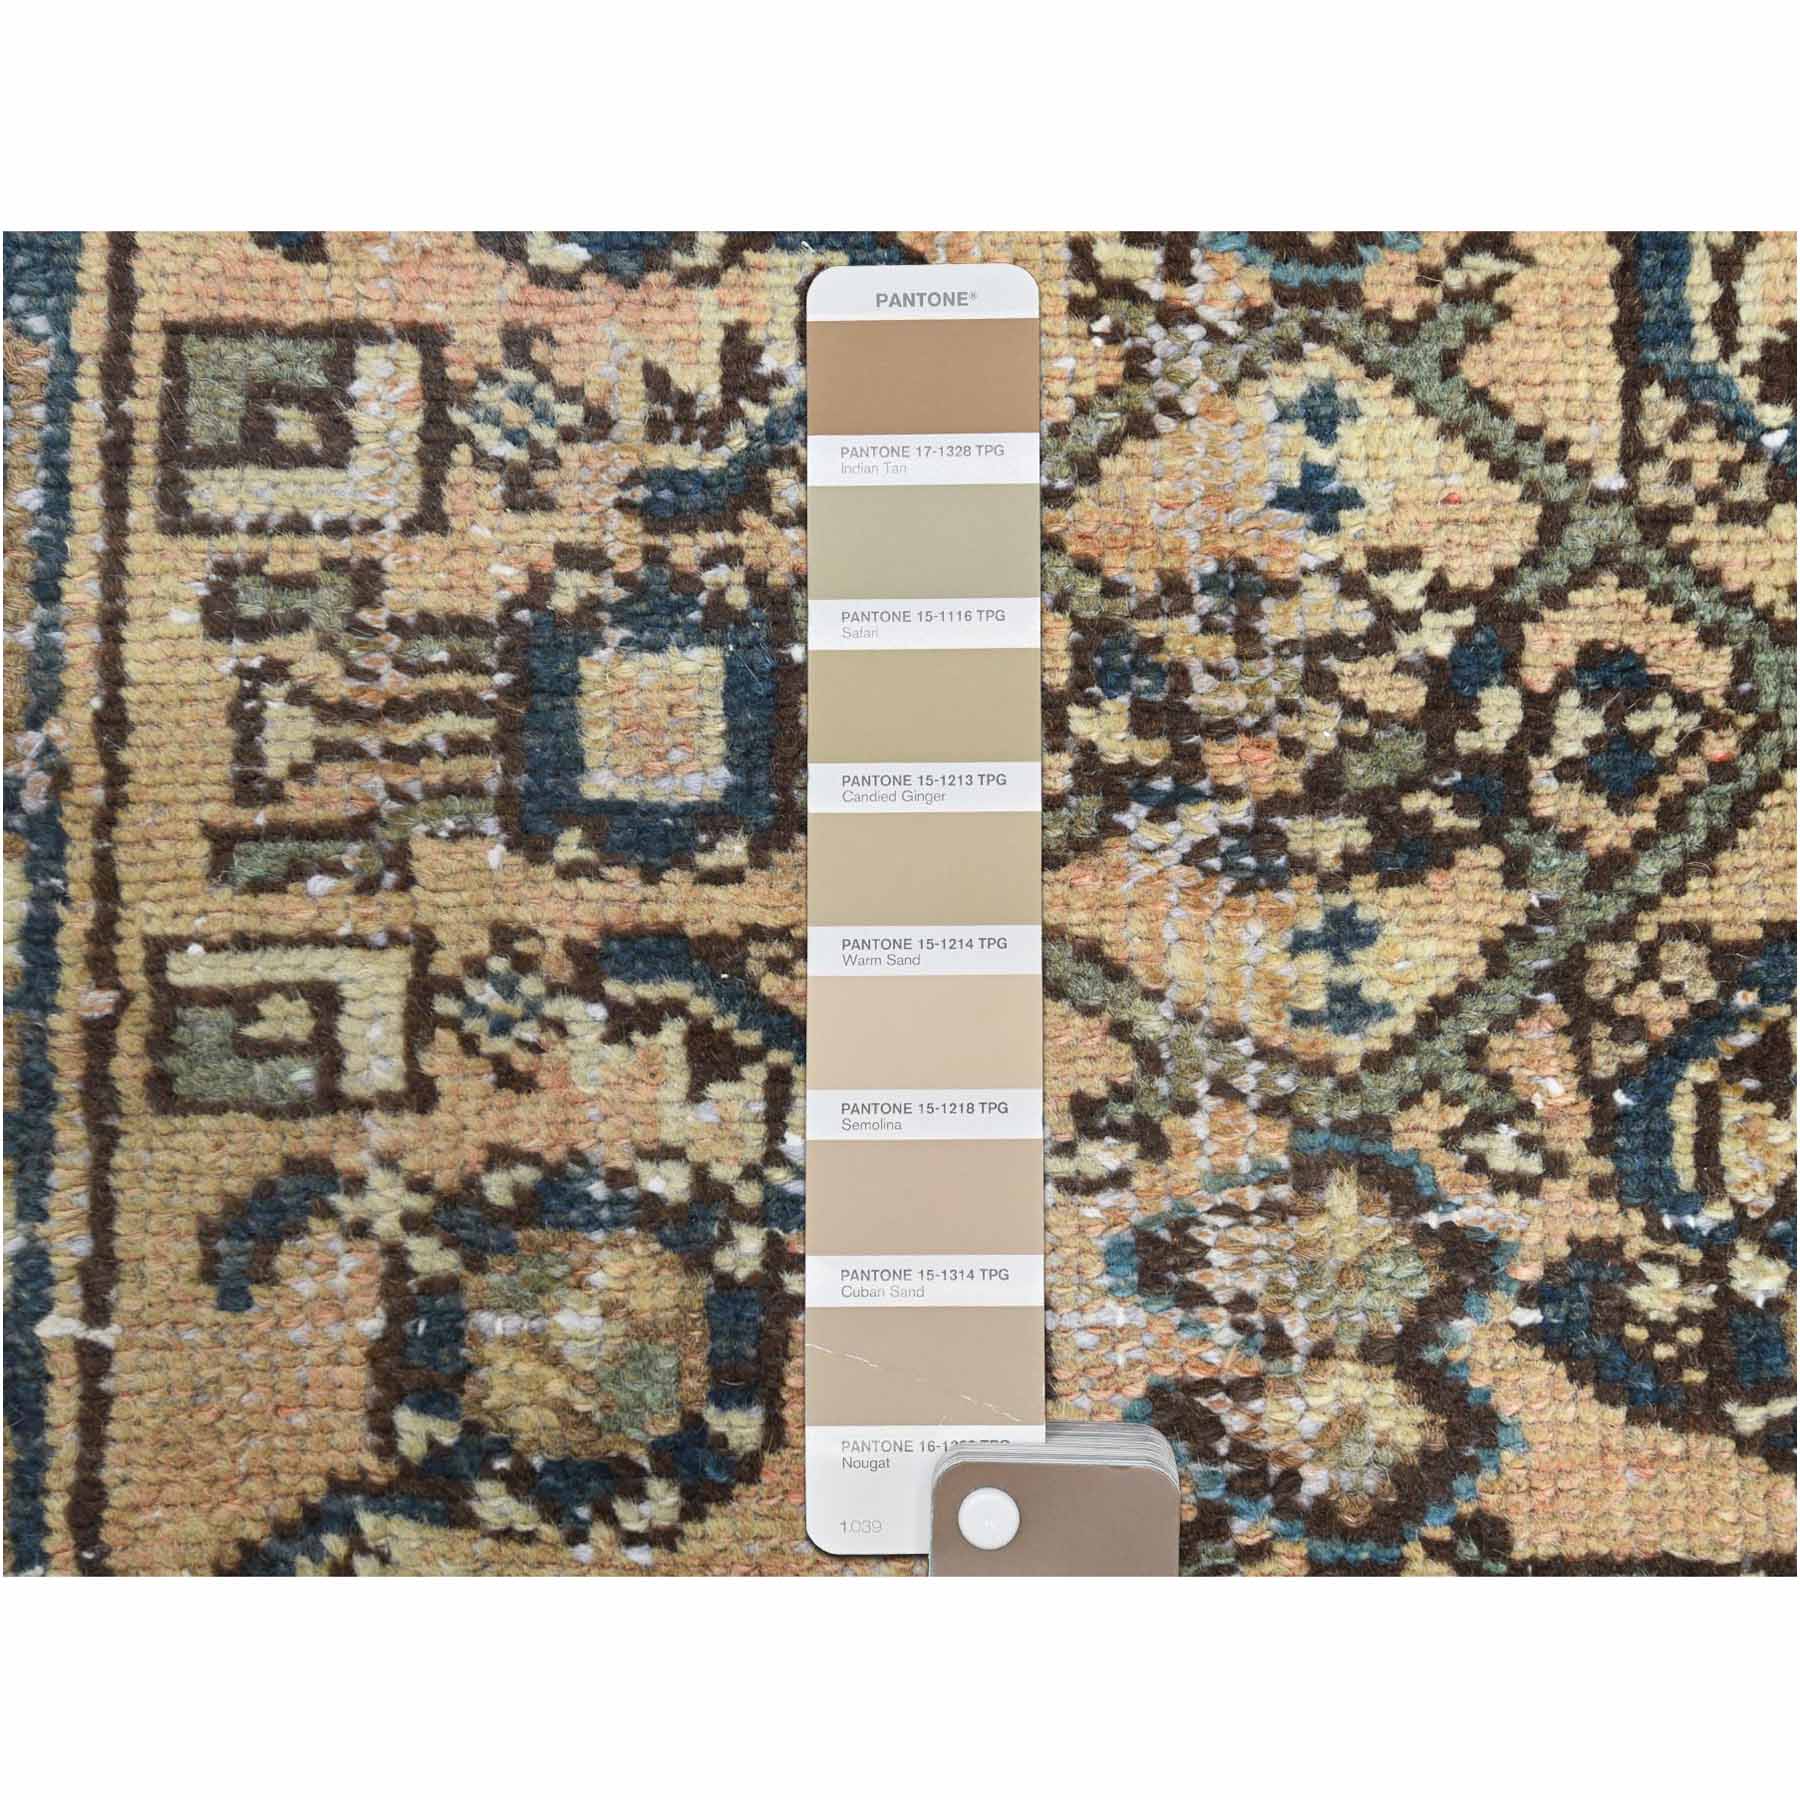 Overdyed-Vintage-Hand-Knotted-Rug-309450